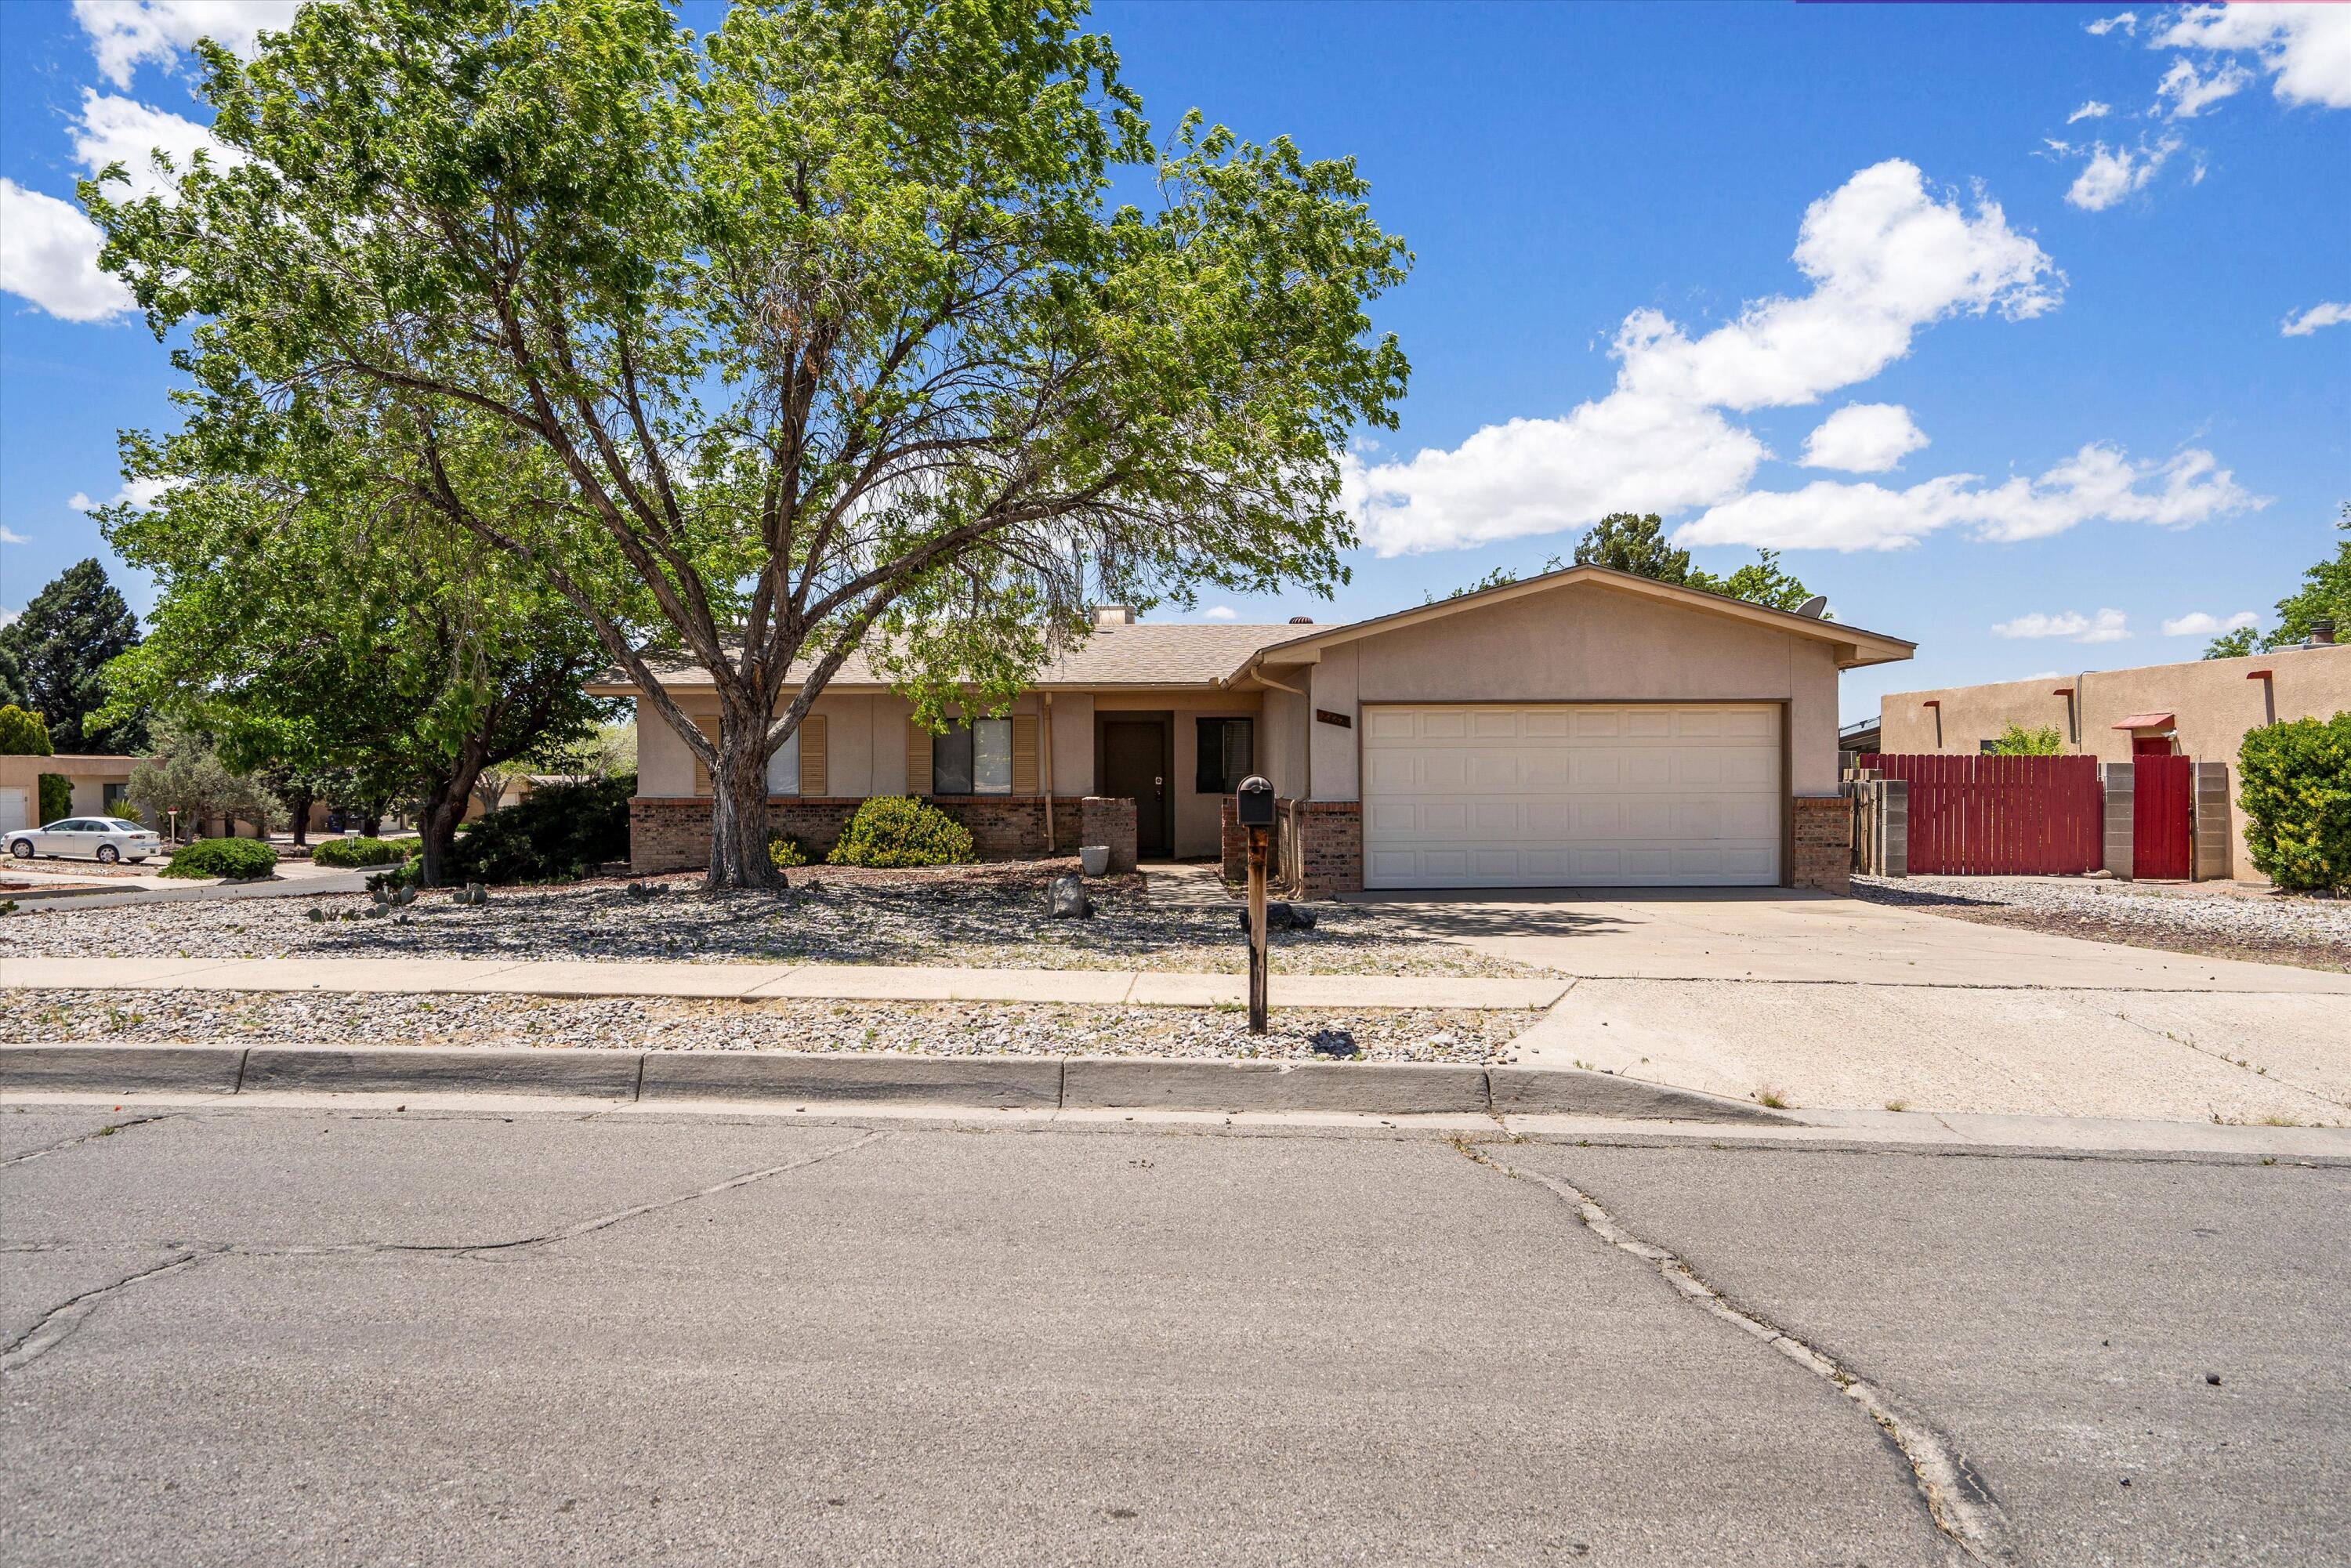 Located on large corner lot in the far NE heights this 3 Bedroom , 1.75 Bath, 1 story home features  2 living area, with laminate wood floors throughout most of the home, and large backyard.  Great schools, shopping and restaurants nearby.  Bring your creative ideas.